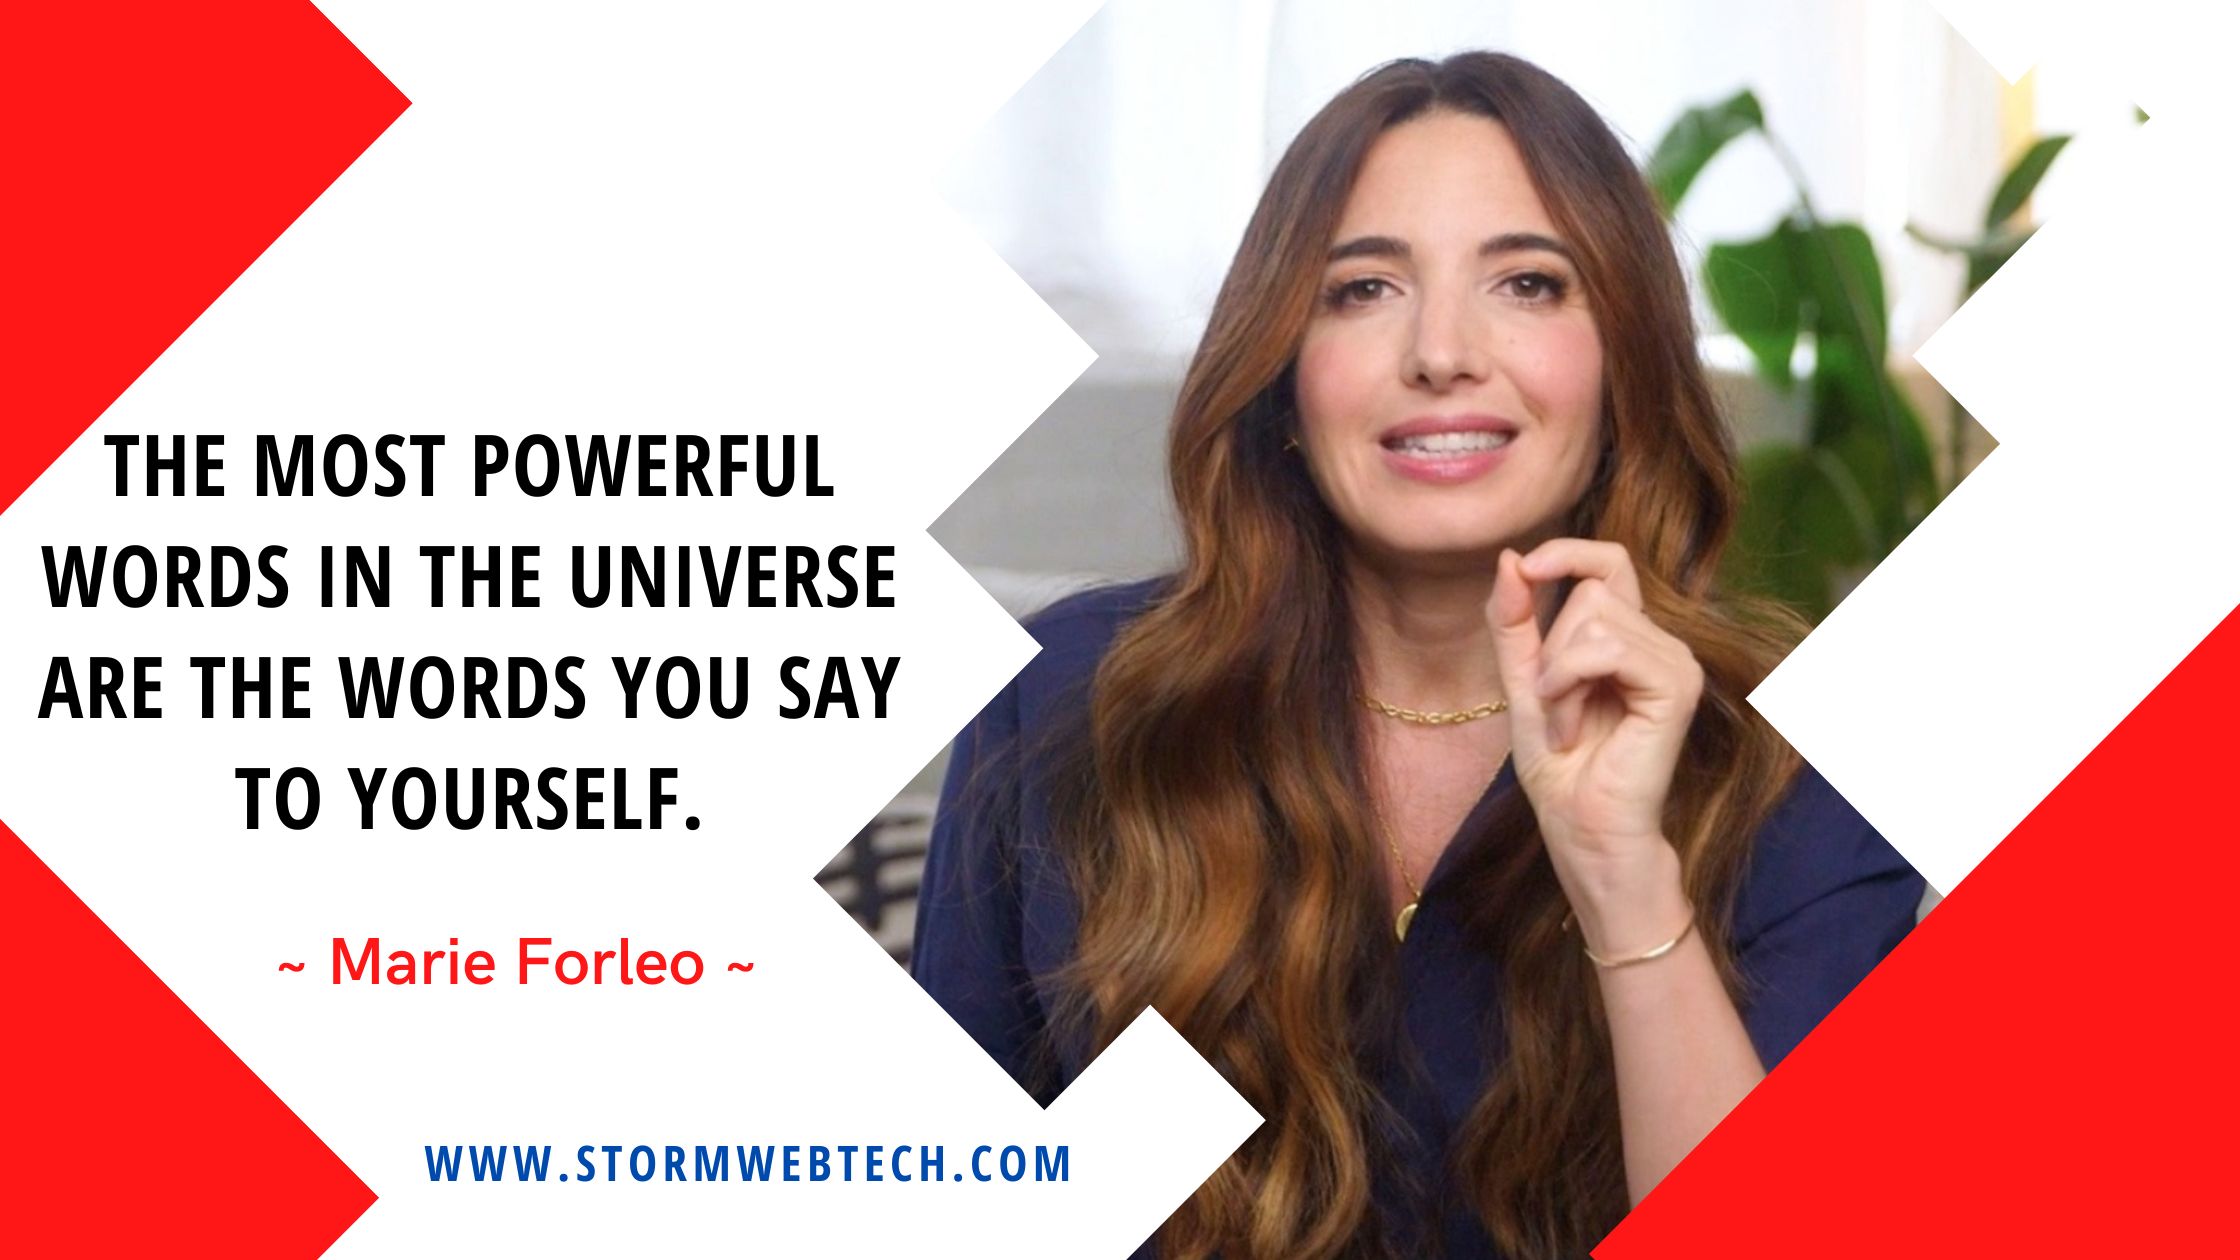 Famous Marie Forleo Quotes In English, Motivational Quotes Of Marie Forleo In English, Marie Forleo Motivational Quotes